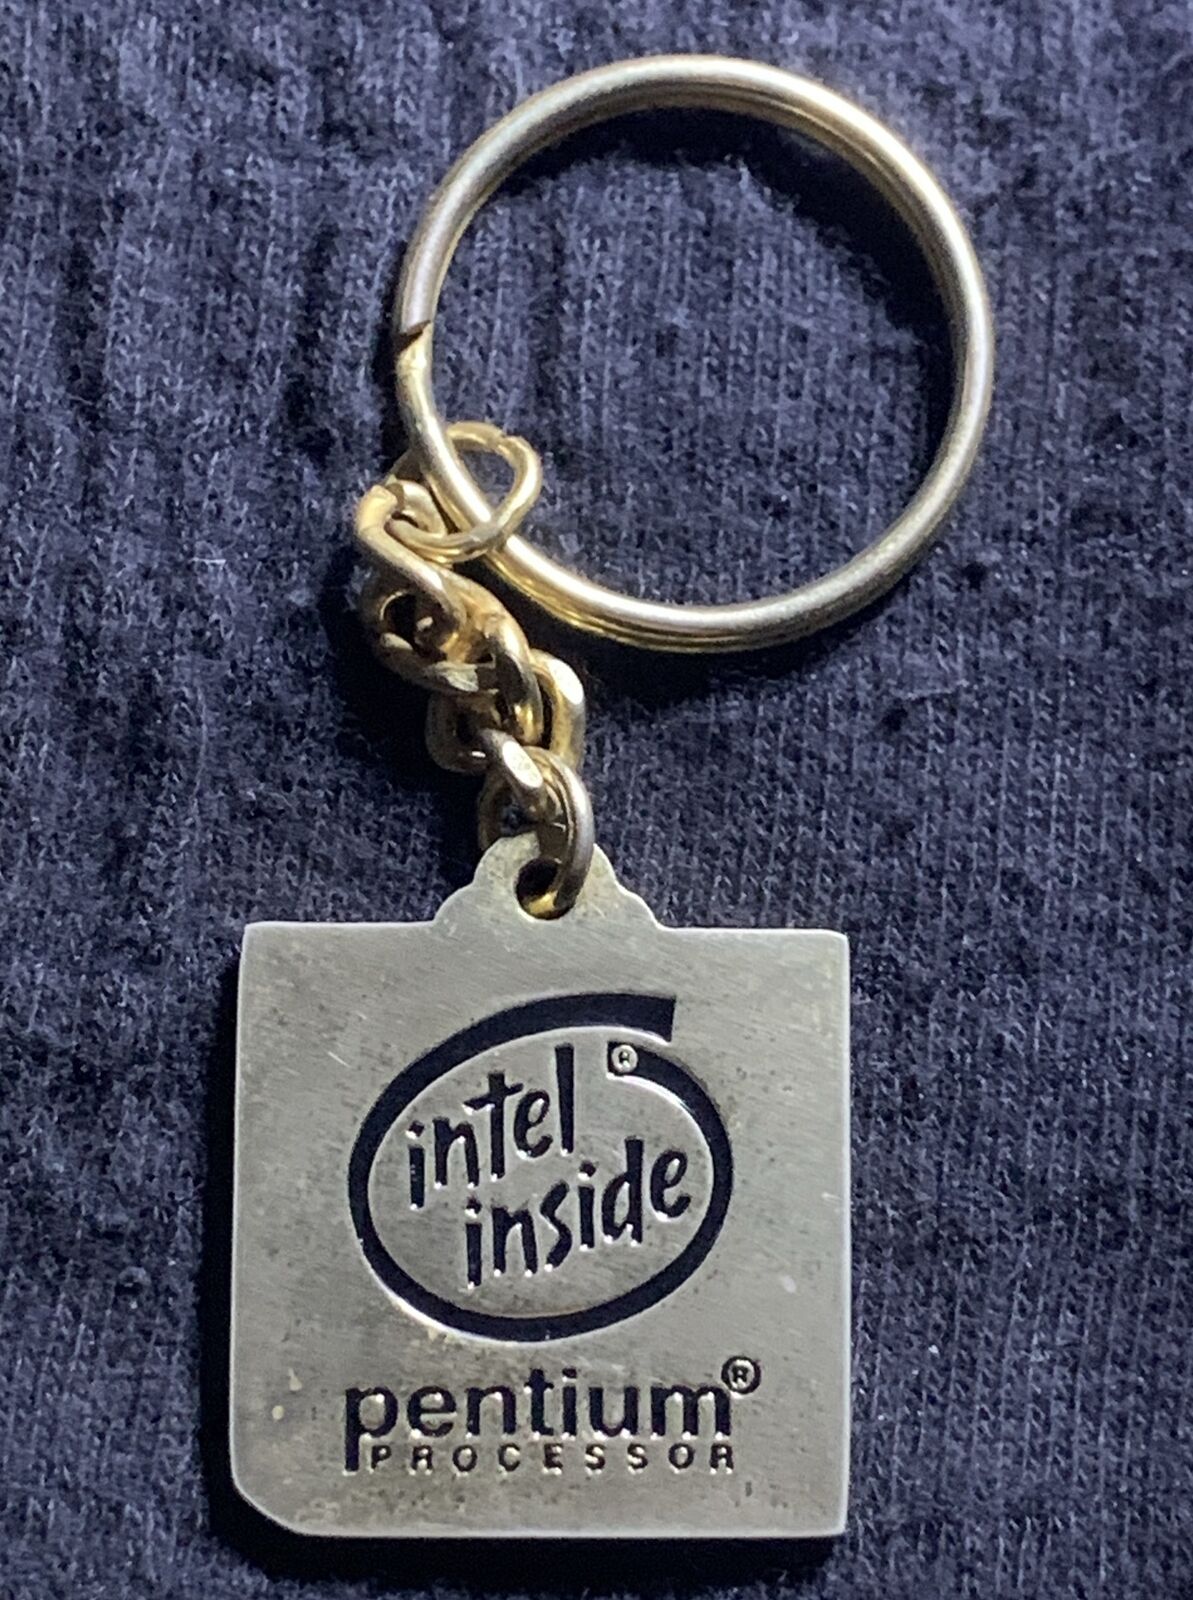 Intel Inside 1990's Pentium Processor Key Chain with Embedded CPU Processor Chip